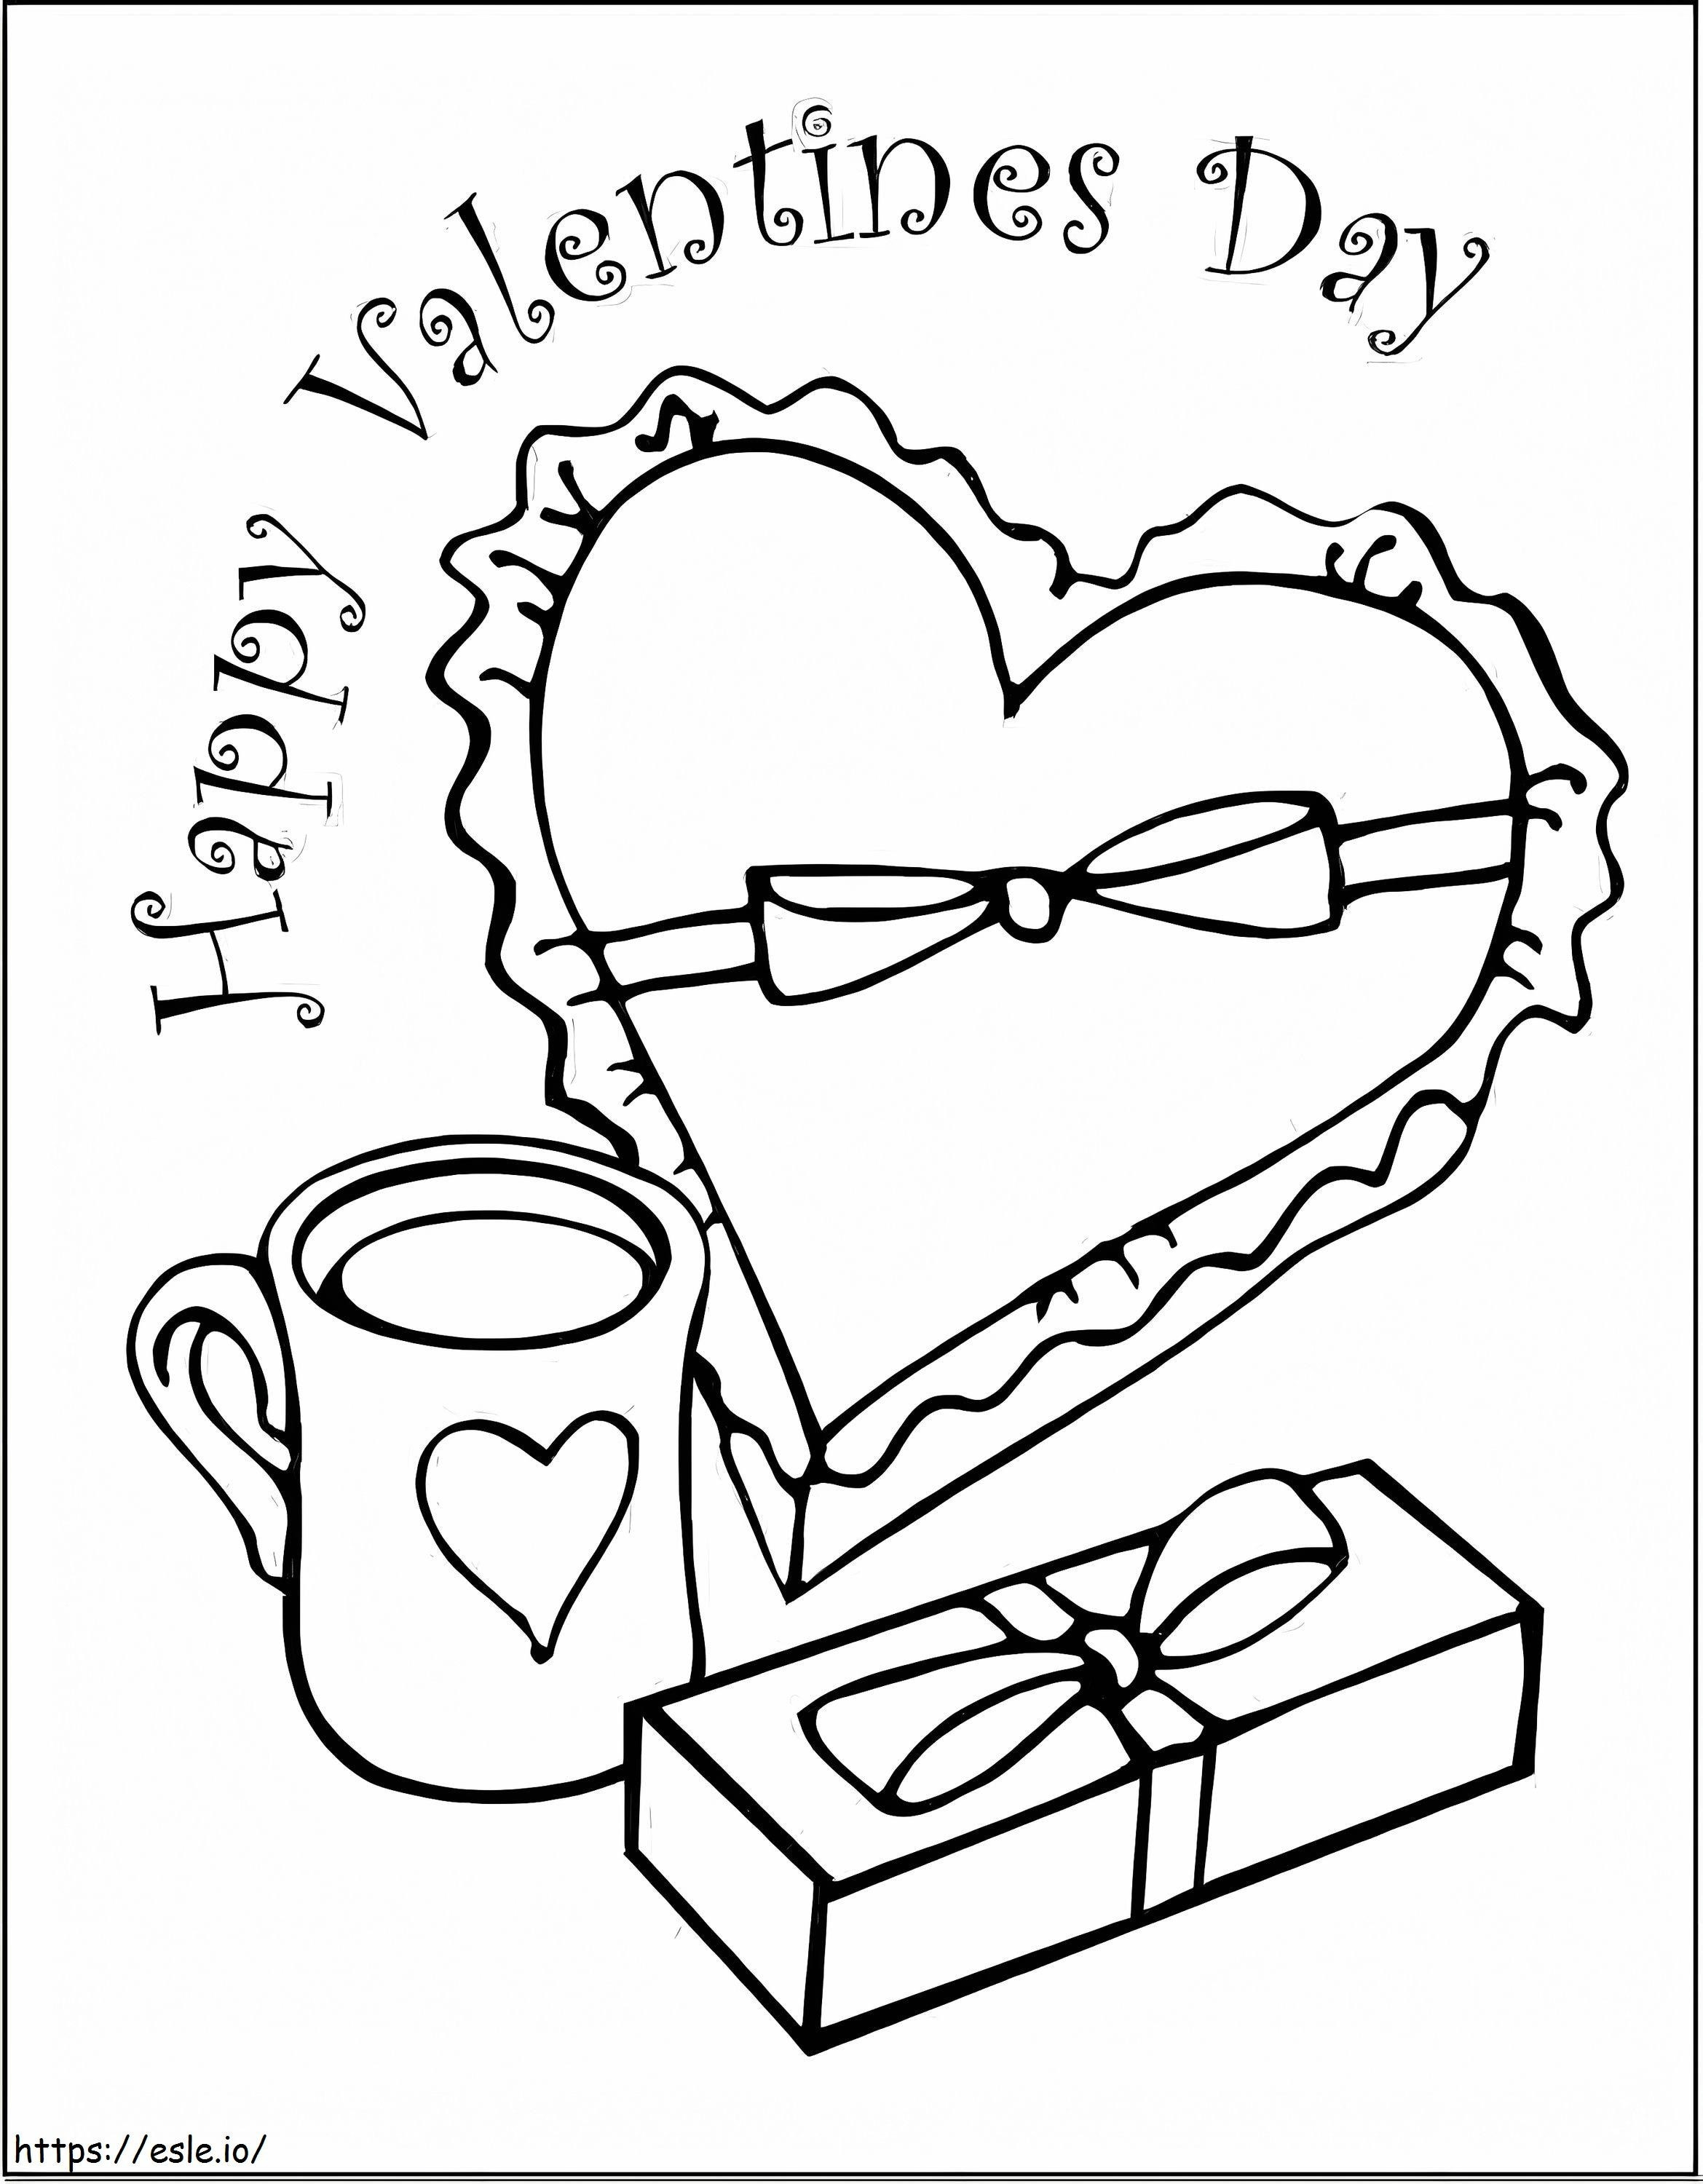 Print Happy Valentines Day coloring page